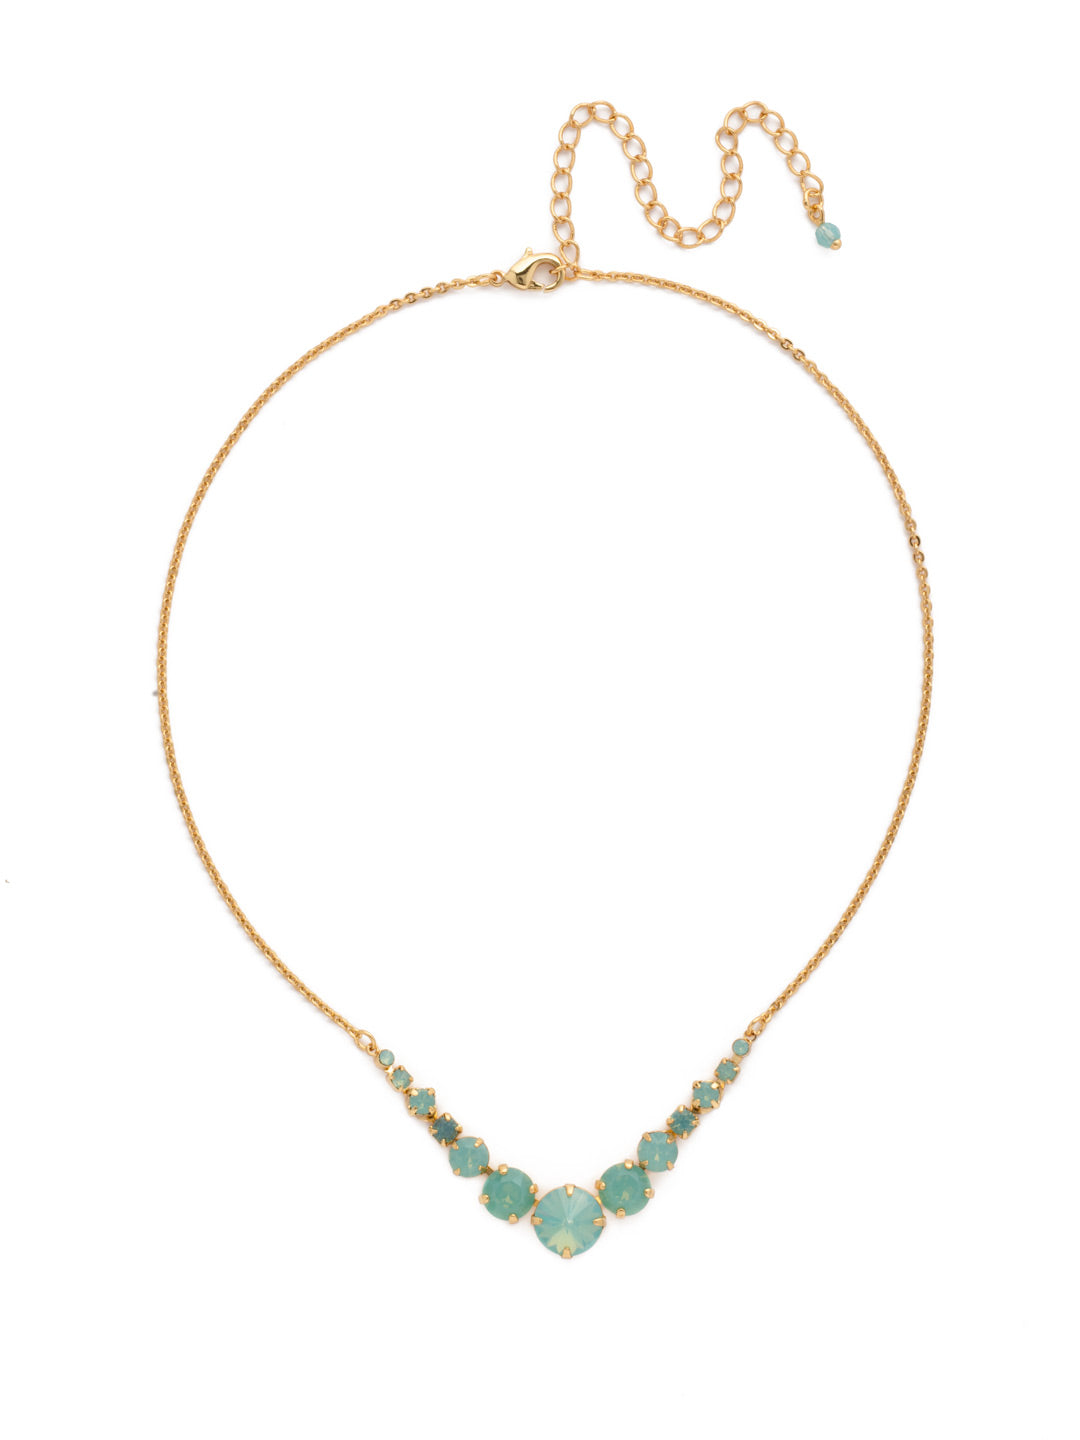 London Tennis Necklace - NCQ14BGPAC - A long, simple chain paired with gorgeous round stones is exactly what every girl needs to dress things up. This round stone necklace is perfect for layering, or to just wear alone. Let the simple sparkle take over. From Sorrelli's Pacific Opal collection in our Bright Gold-tone finish.